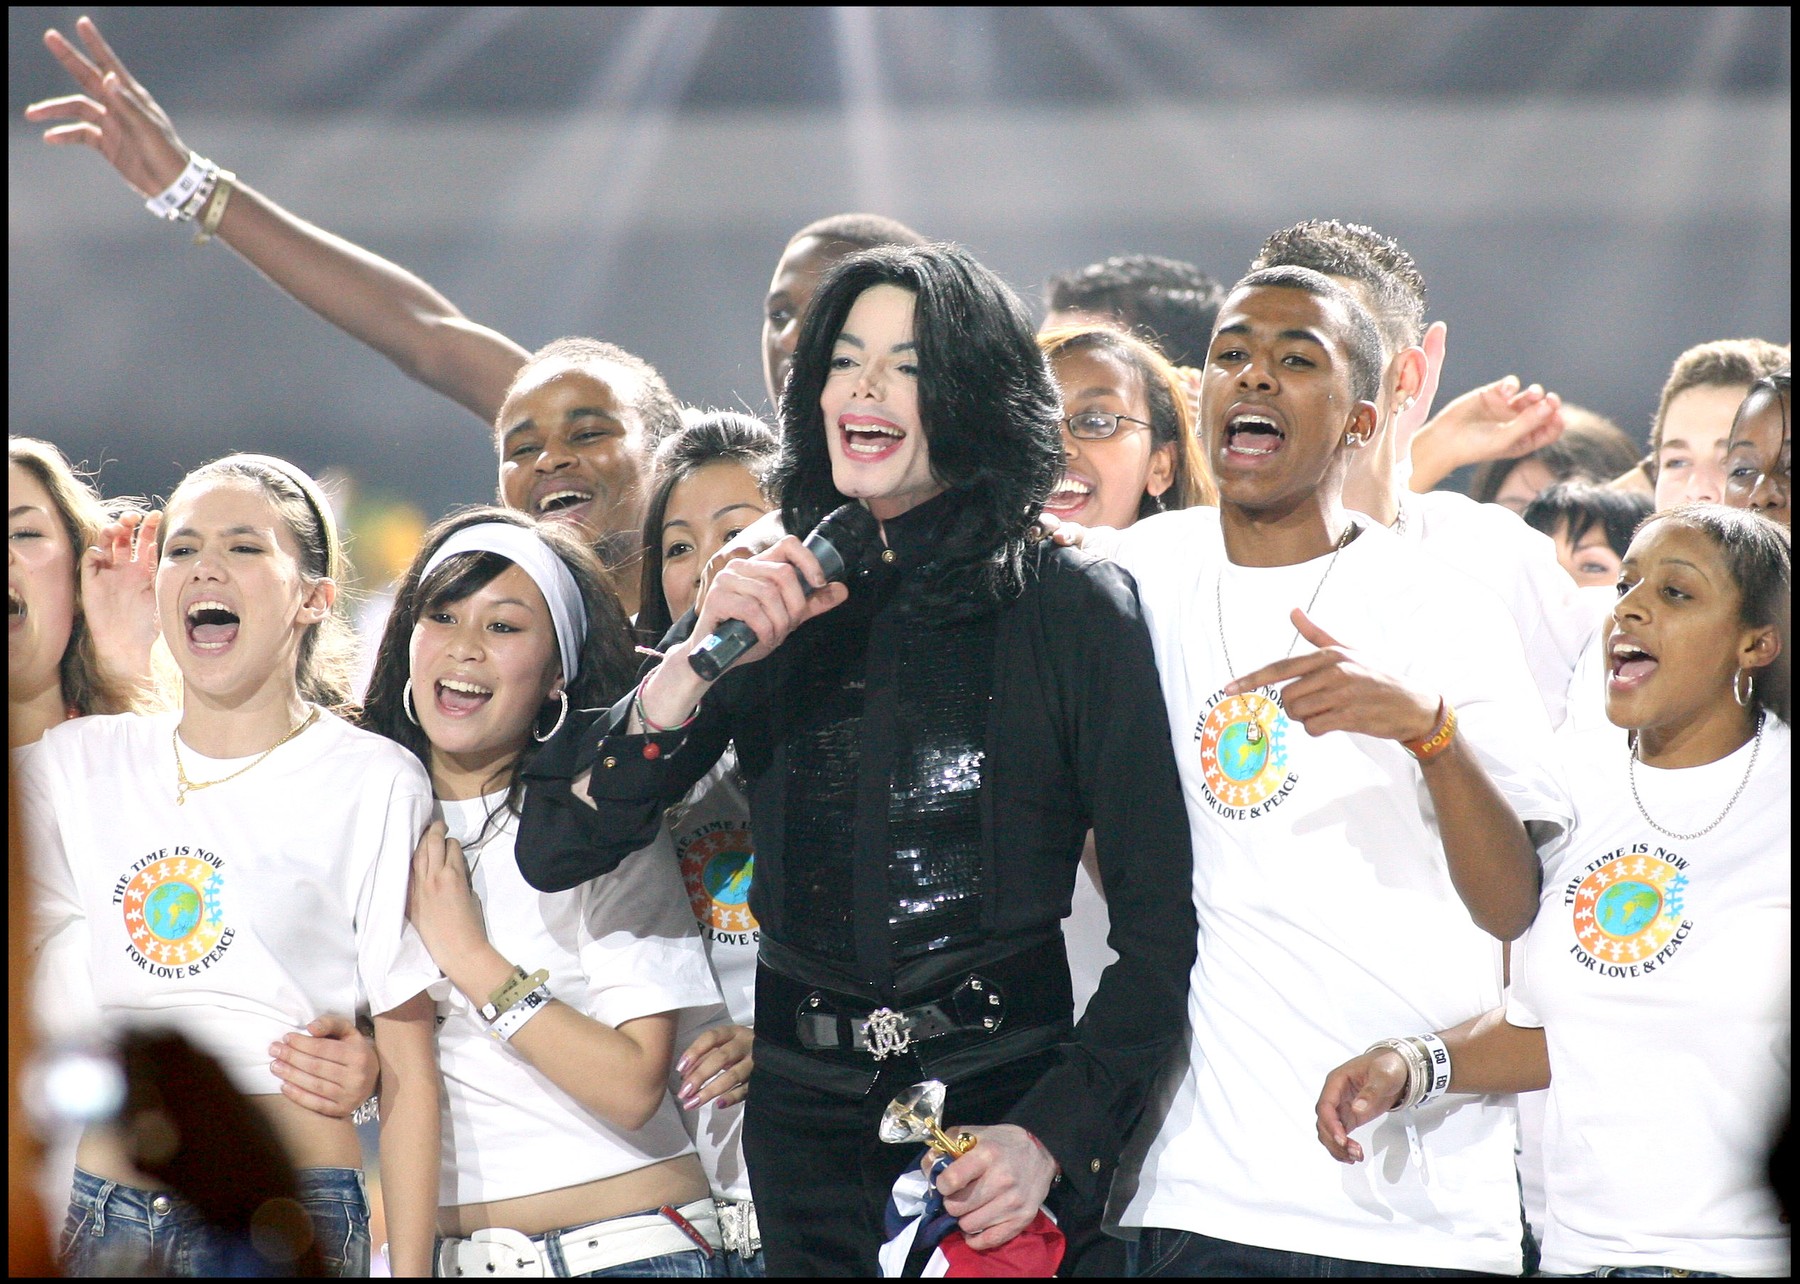 MICHAEL JACKSON - CEREMONIE DES WORLD MUSIC AWARDS 2006 AU "LONDON'S EARLS COURT" DE LONDRES
The 2006 World Music Awards took place at London's Earls Court on Weds 15th November. The awards, hosted by Lindsay Lohan, was attended by an impressived number of celebrities and performances included Michael Jackson and Beyonce.  | 00115214,Image: 19548598, License: Rights-managed, Restrictions: , Model Release: no, Credit line: VENTURELLI / ANGELI / Bestimage / Profimedia